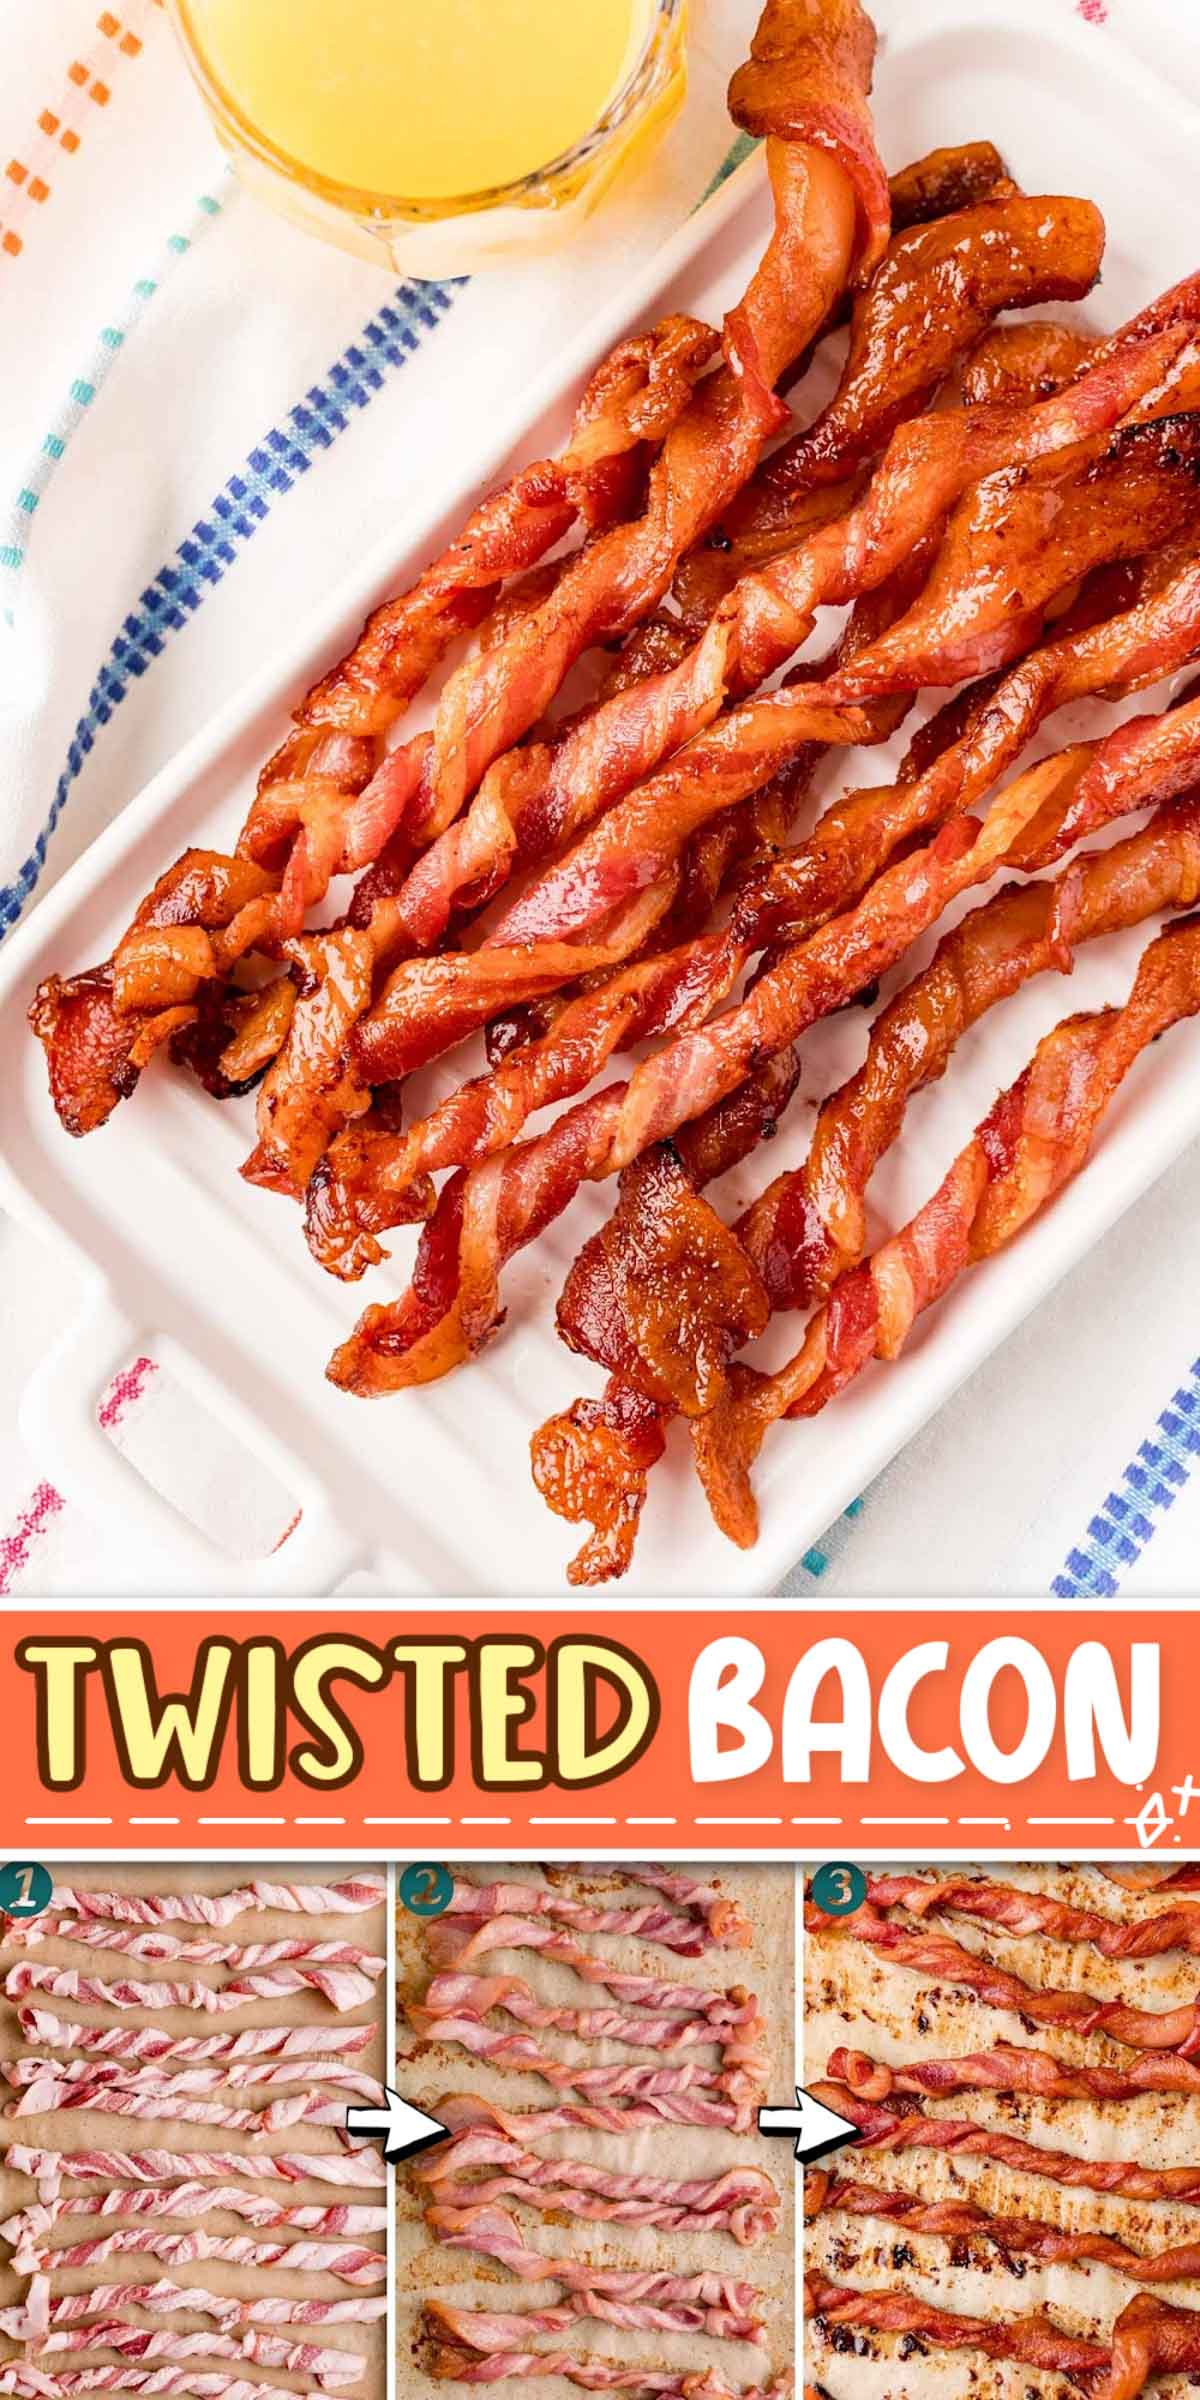 Twisted Bacon is taking over the internet as the BEST method for cooking bacon - it's the perfect mix of soft and crispy! This viral TikTok trend is so easy to make and everyone will love how delicious and juicy it is! via @sugarandsoulco